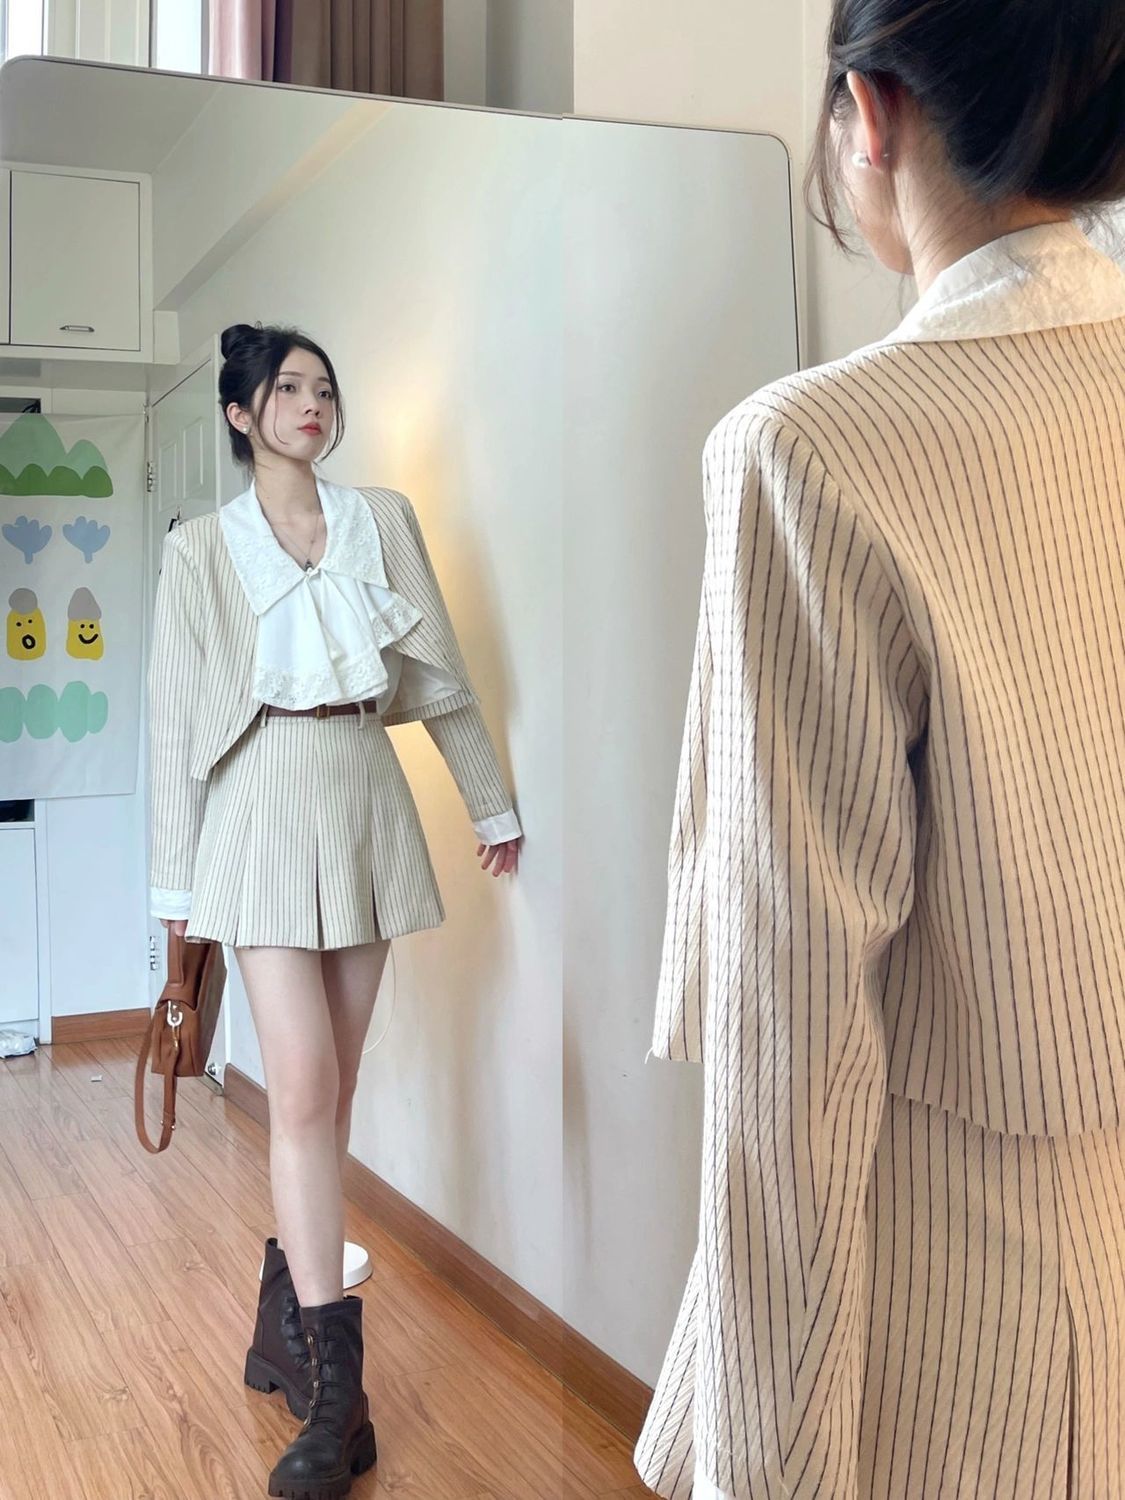 Three-piece suit light luxury style spring and autumn high-quality striped small suit jacket wearing a large lapel shirt skirt